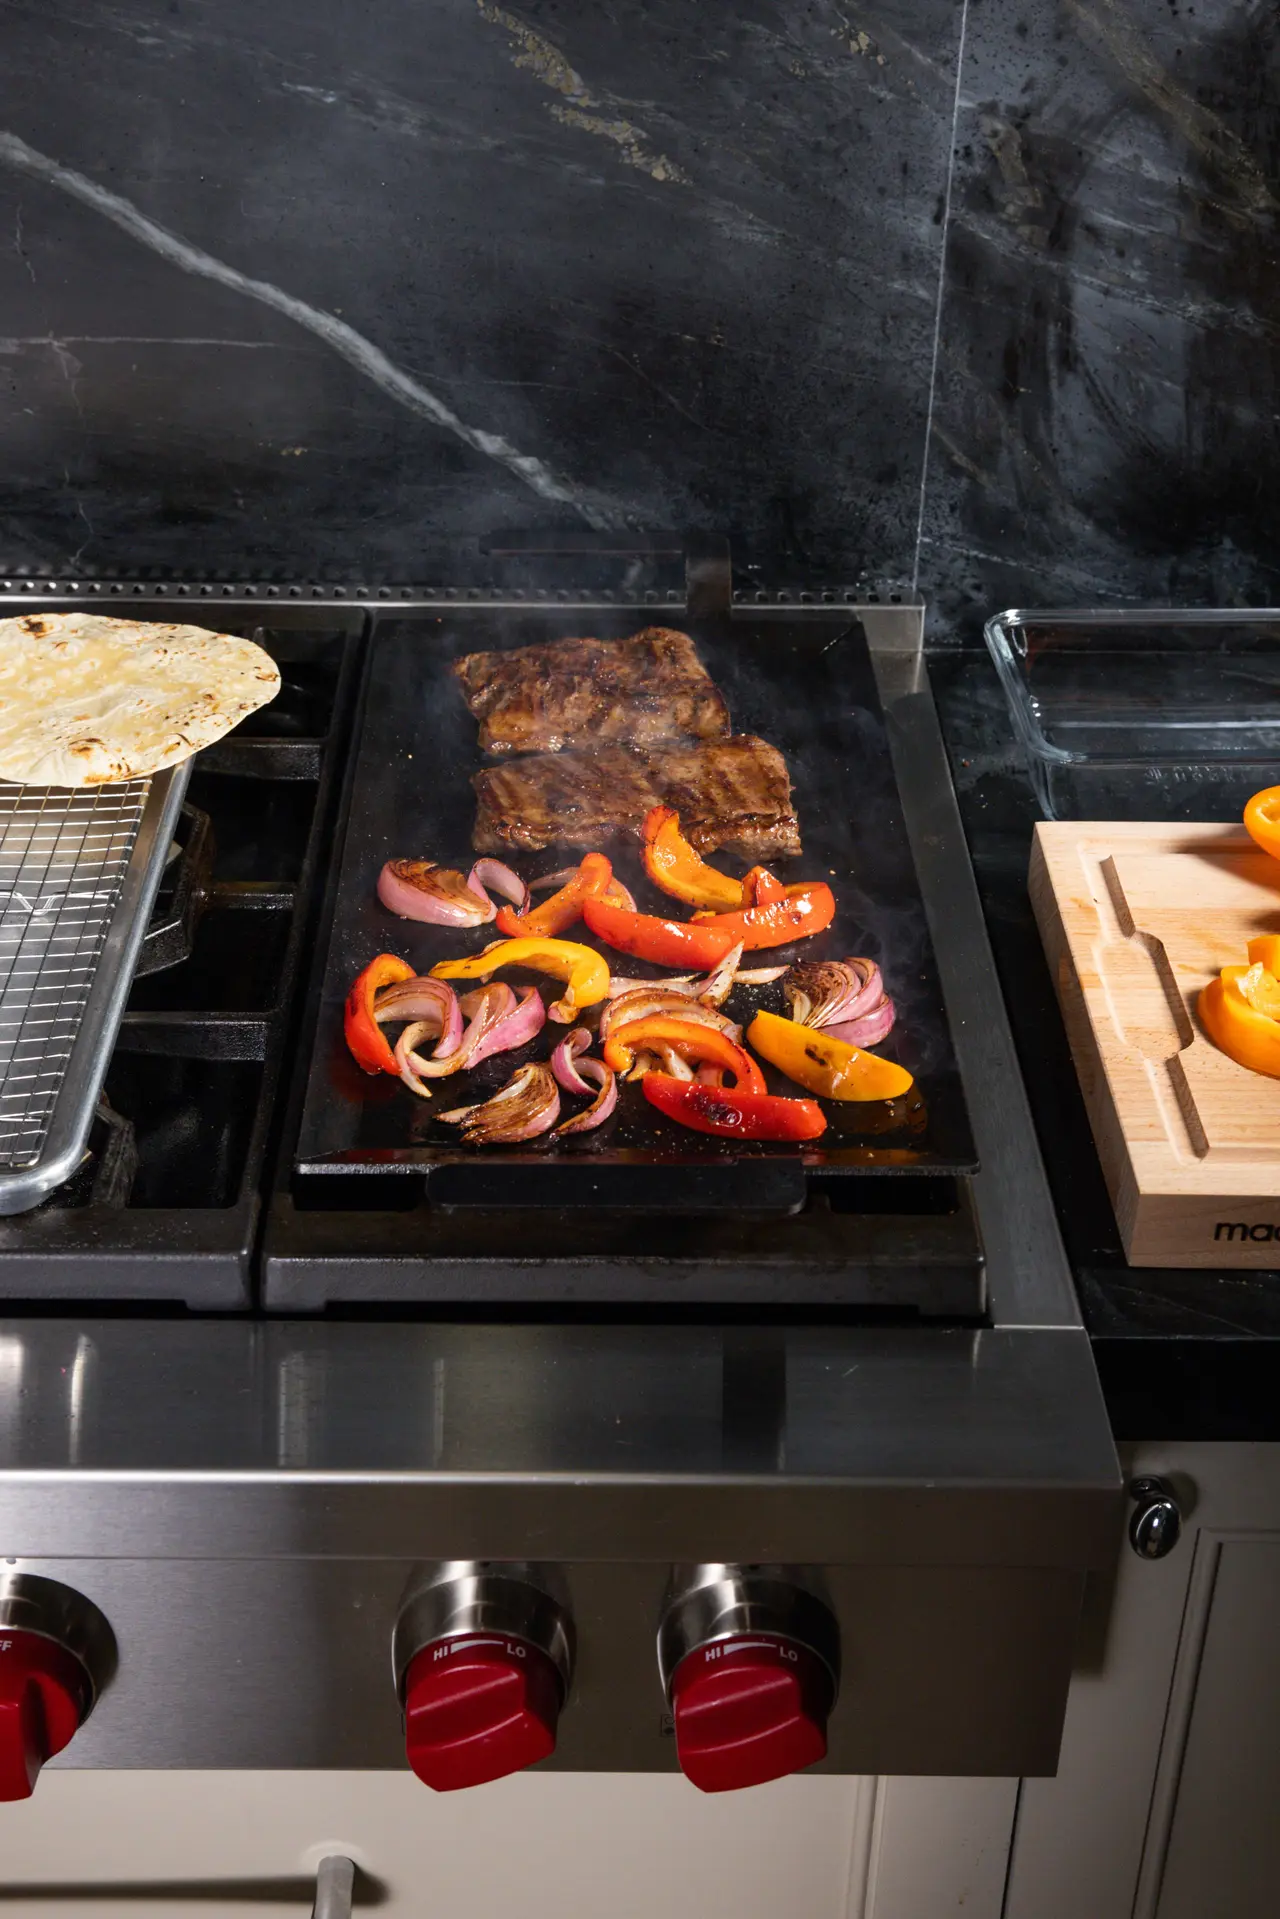 Ribs and mixed bell peppers with onions are grilling on a stove top, with tortillas and citrus fruits nearby, suggesting preparation for a meal.